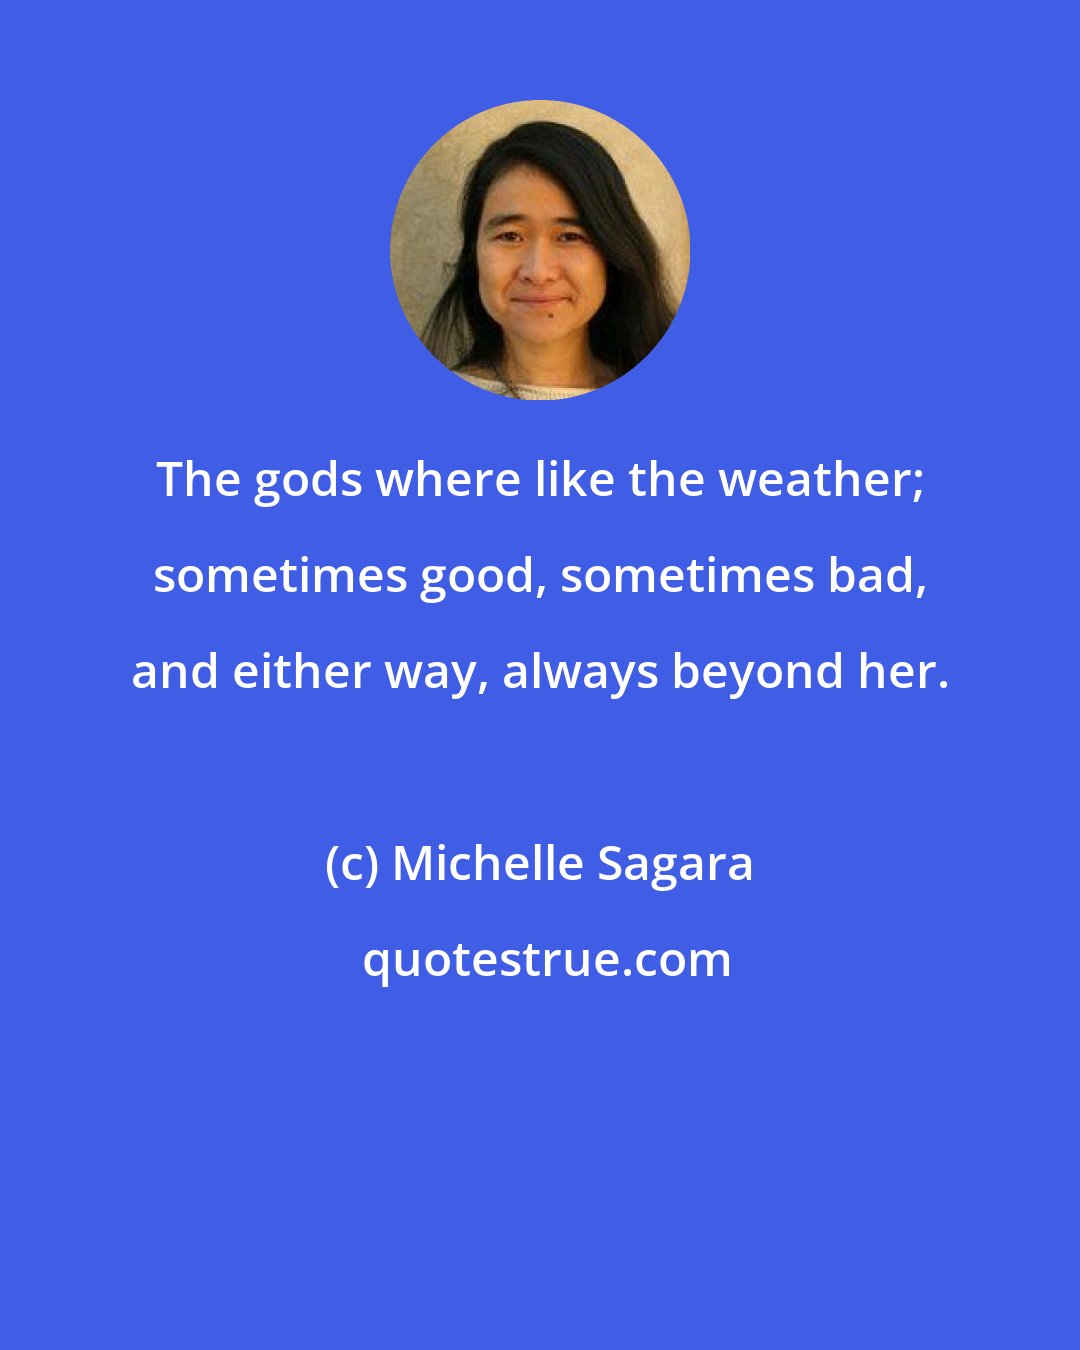 Michelle Sagara: The gods where like the weather; sometimes good, sometimes bad, and either way, always beyond her.